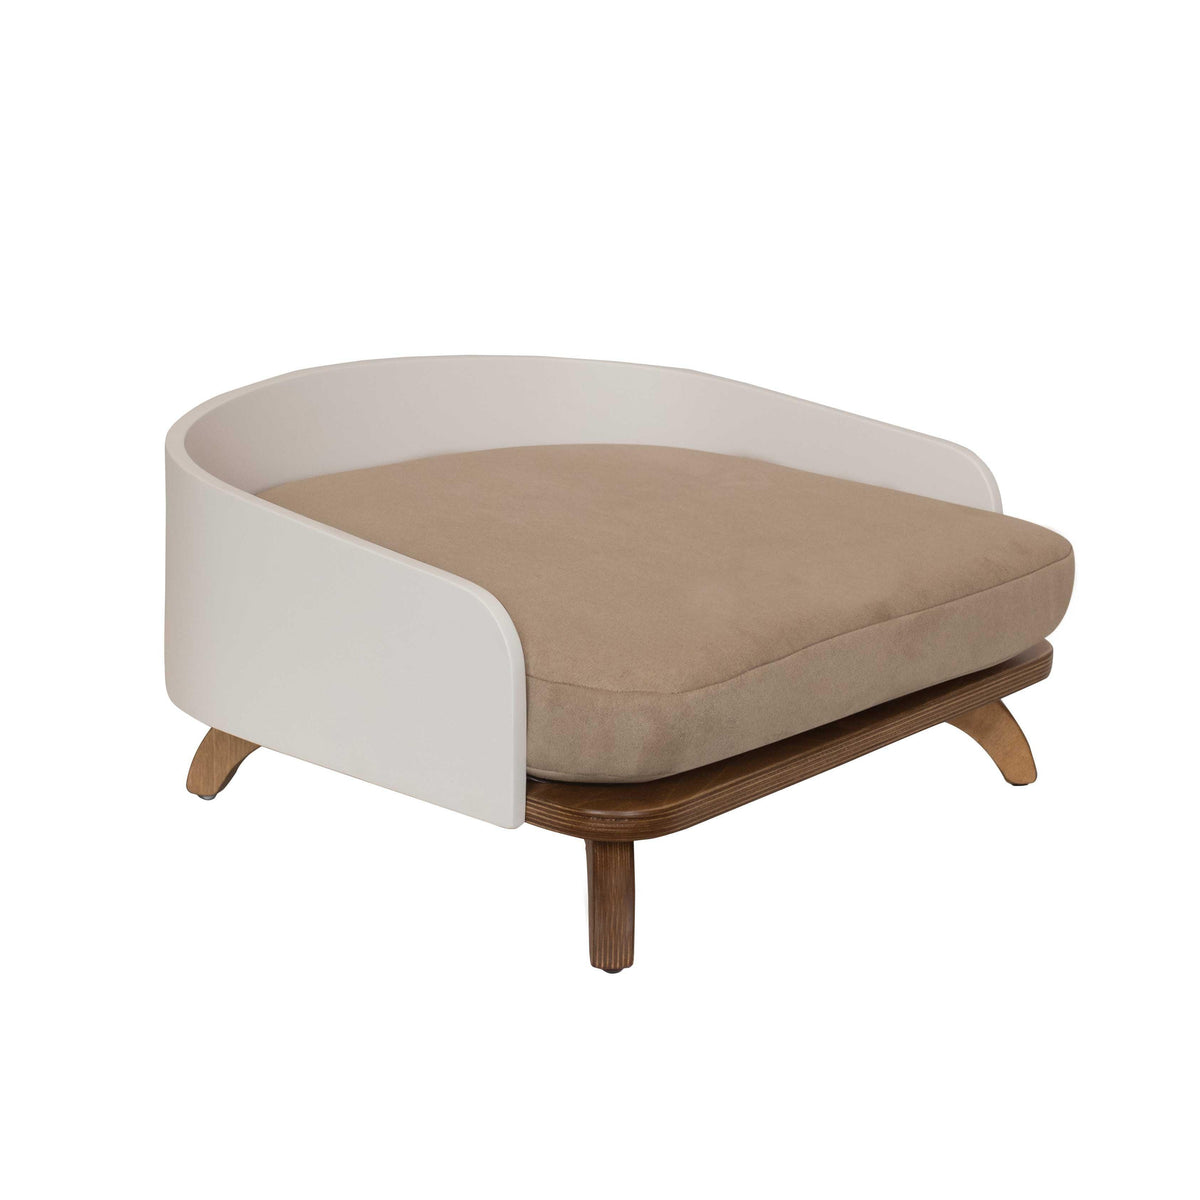 Cat Bed Milos - Cat Beds - Luxury Dog House - ewoodcollection.com